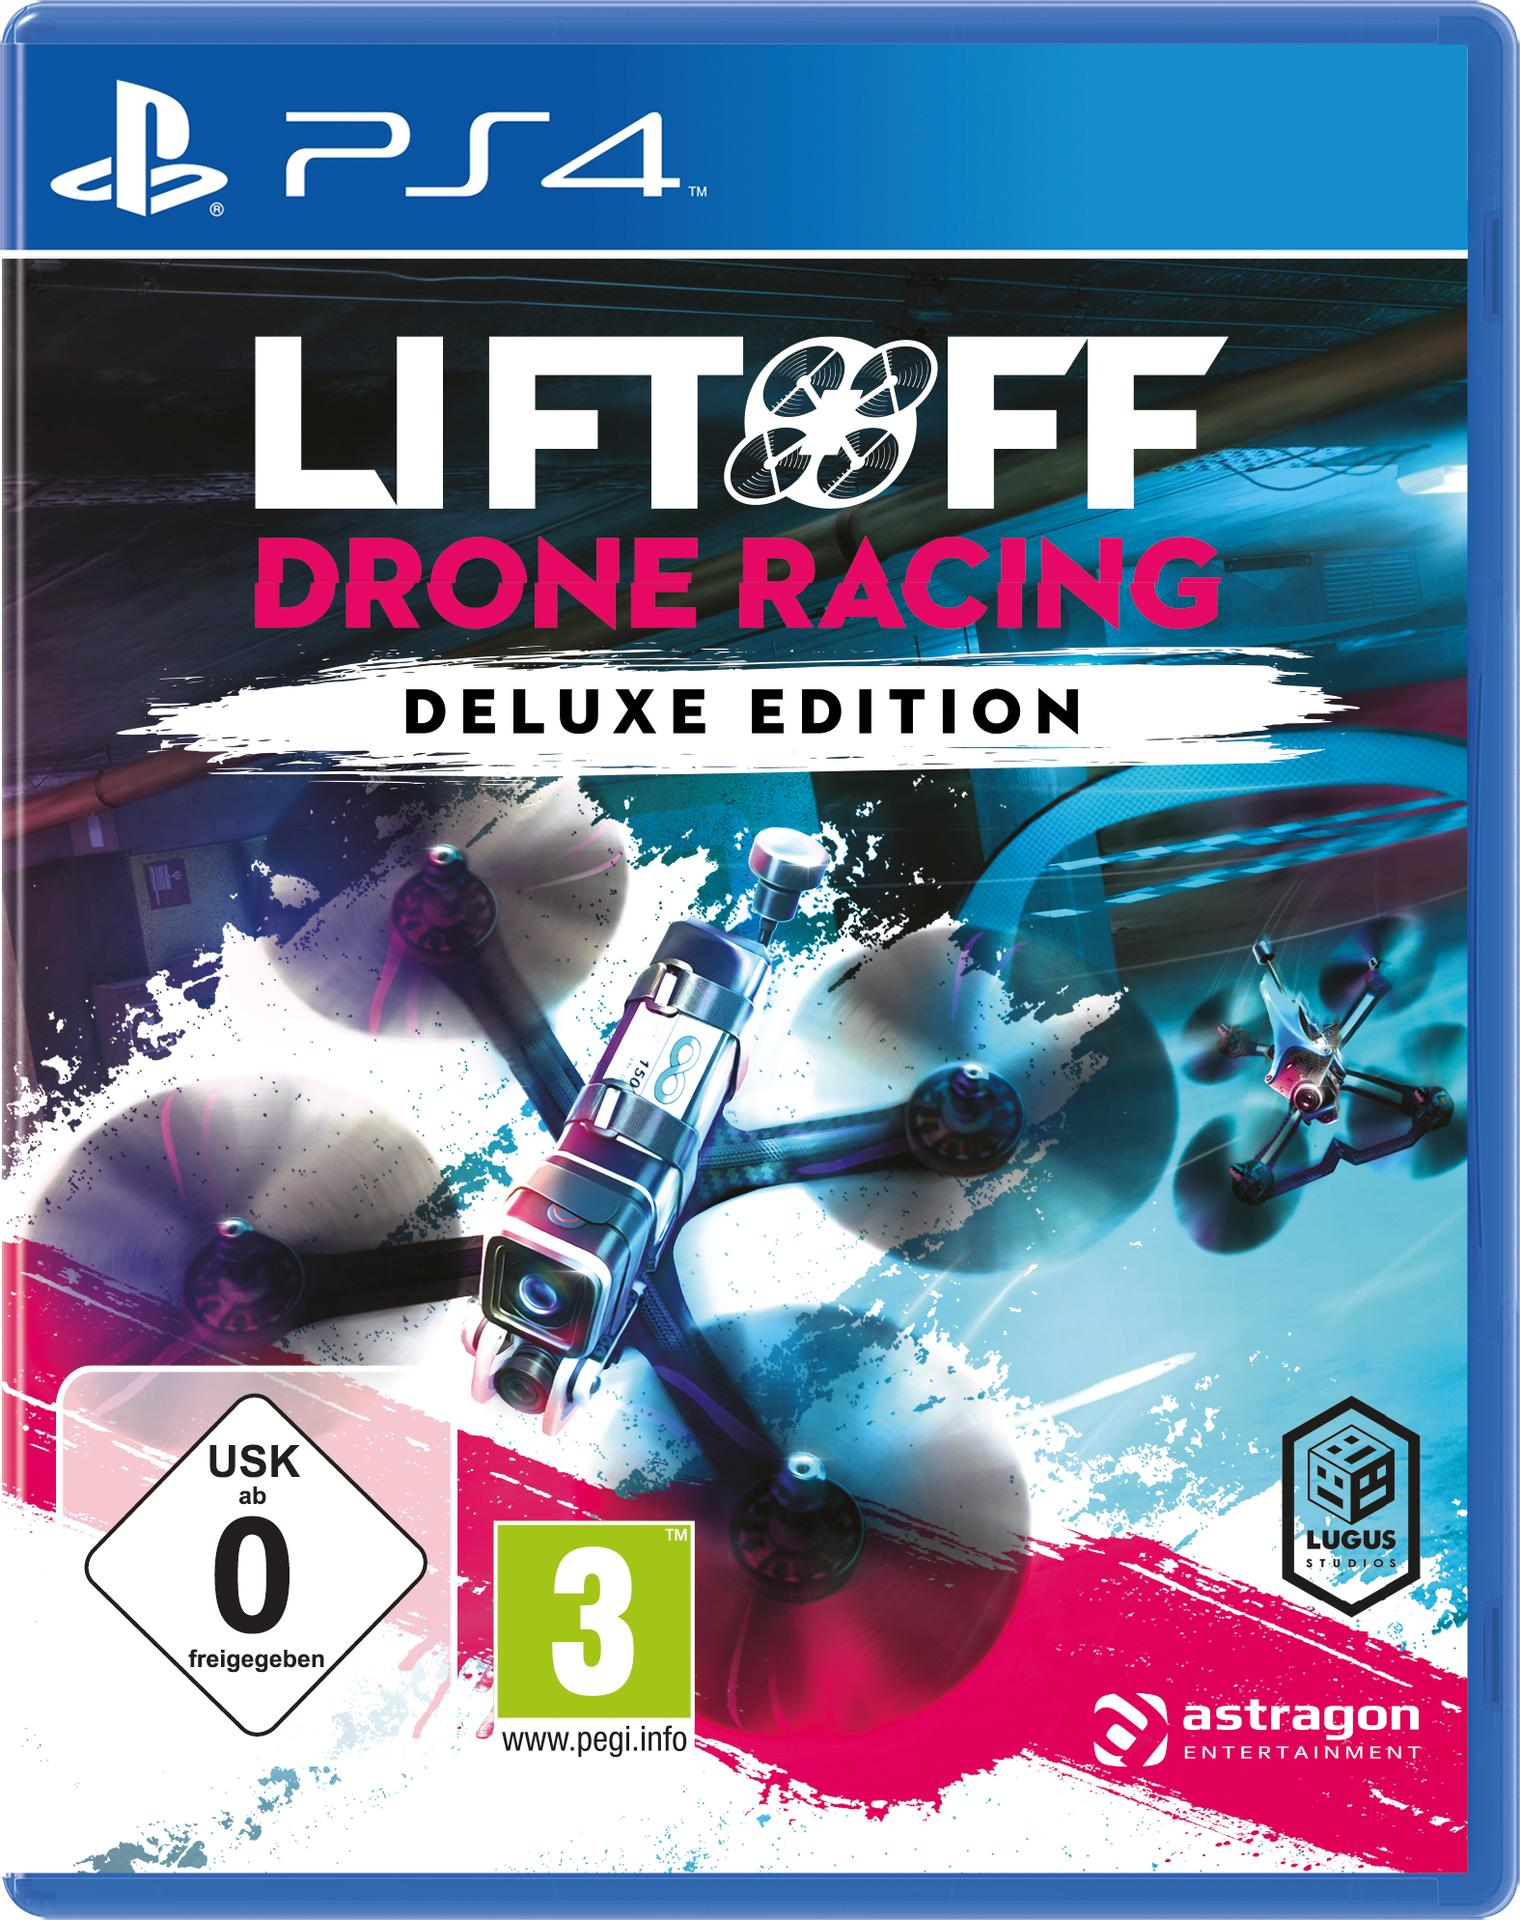 [PlayStation Racing Drone - Deluxe 4] Liftoff: Edition